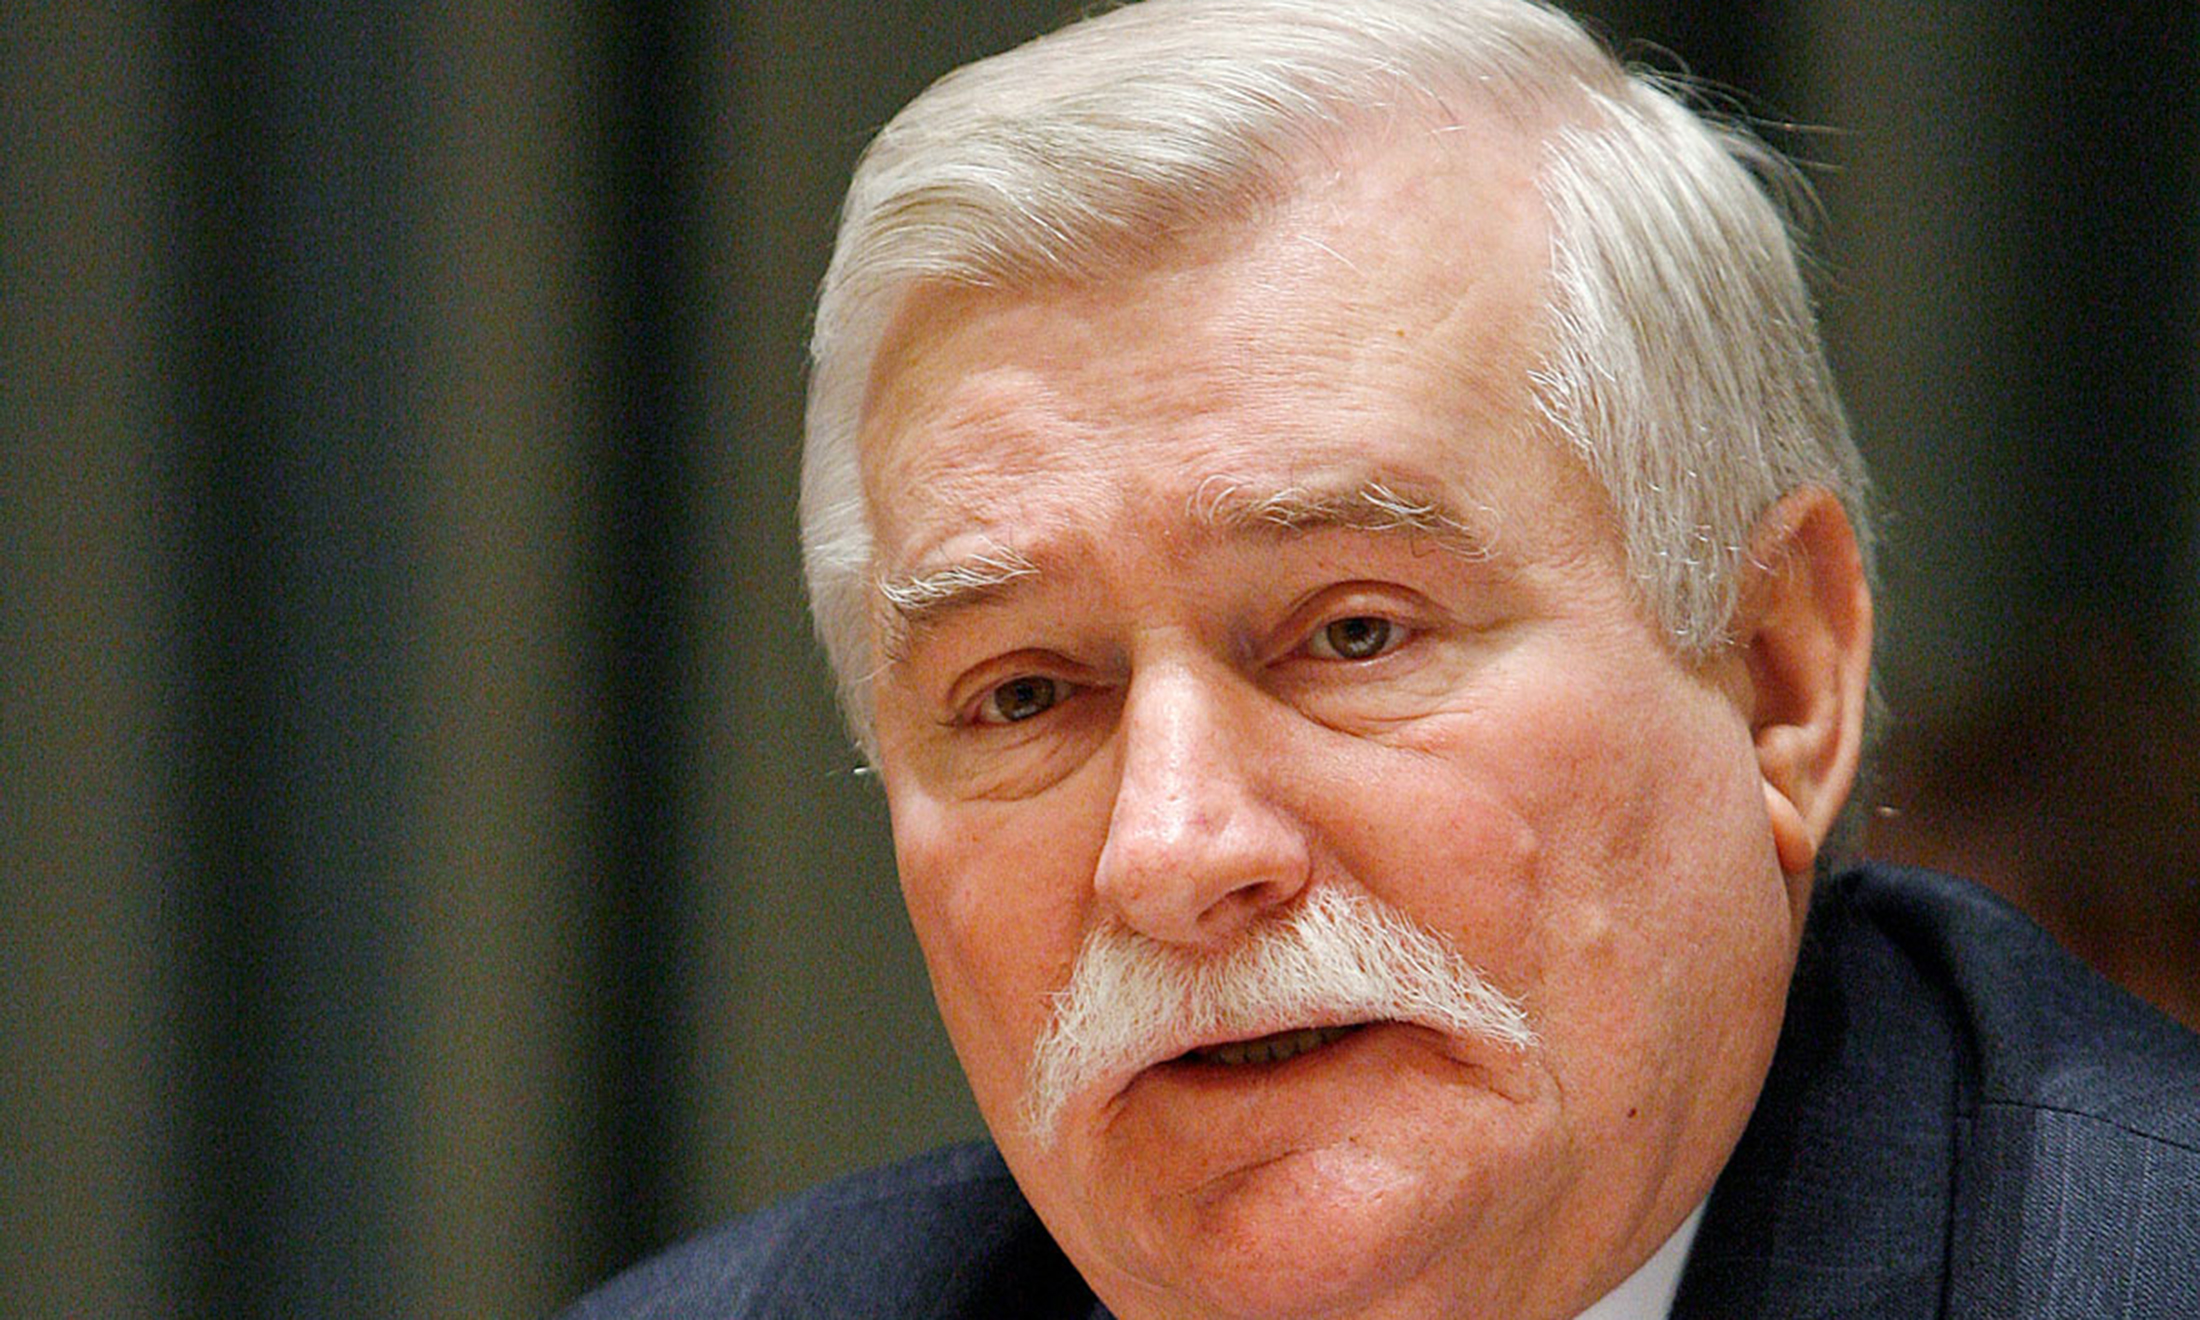 Former Poland President Lech Walesa to lead lecture at Oakland University